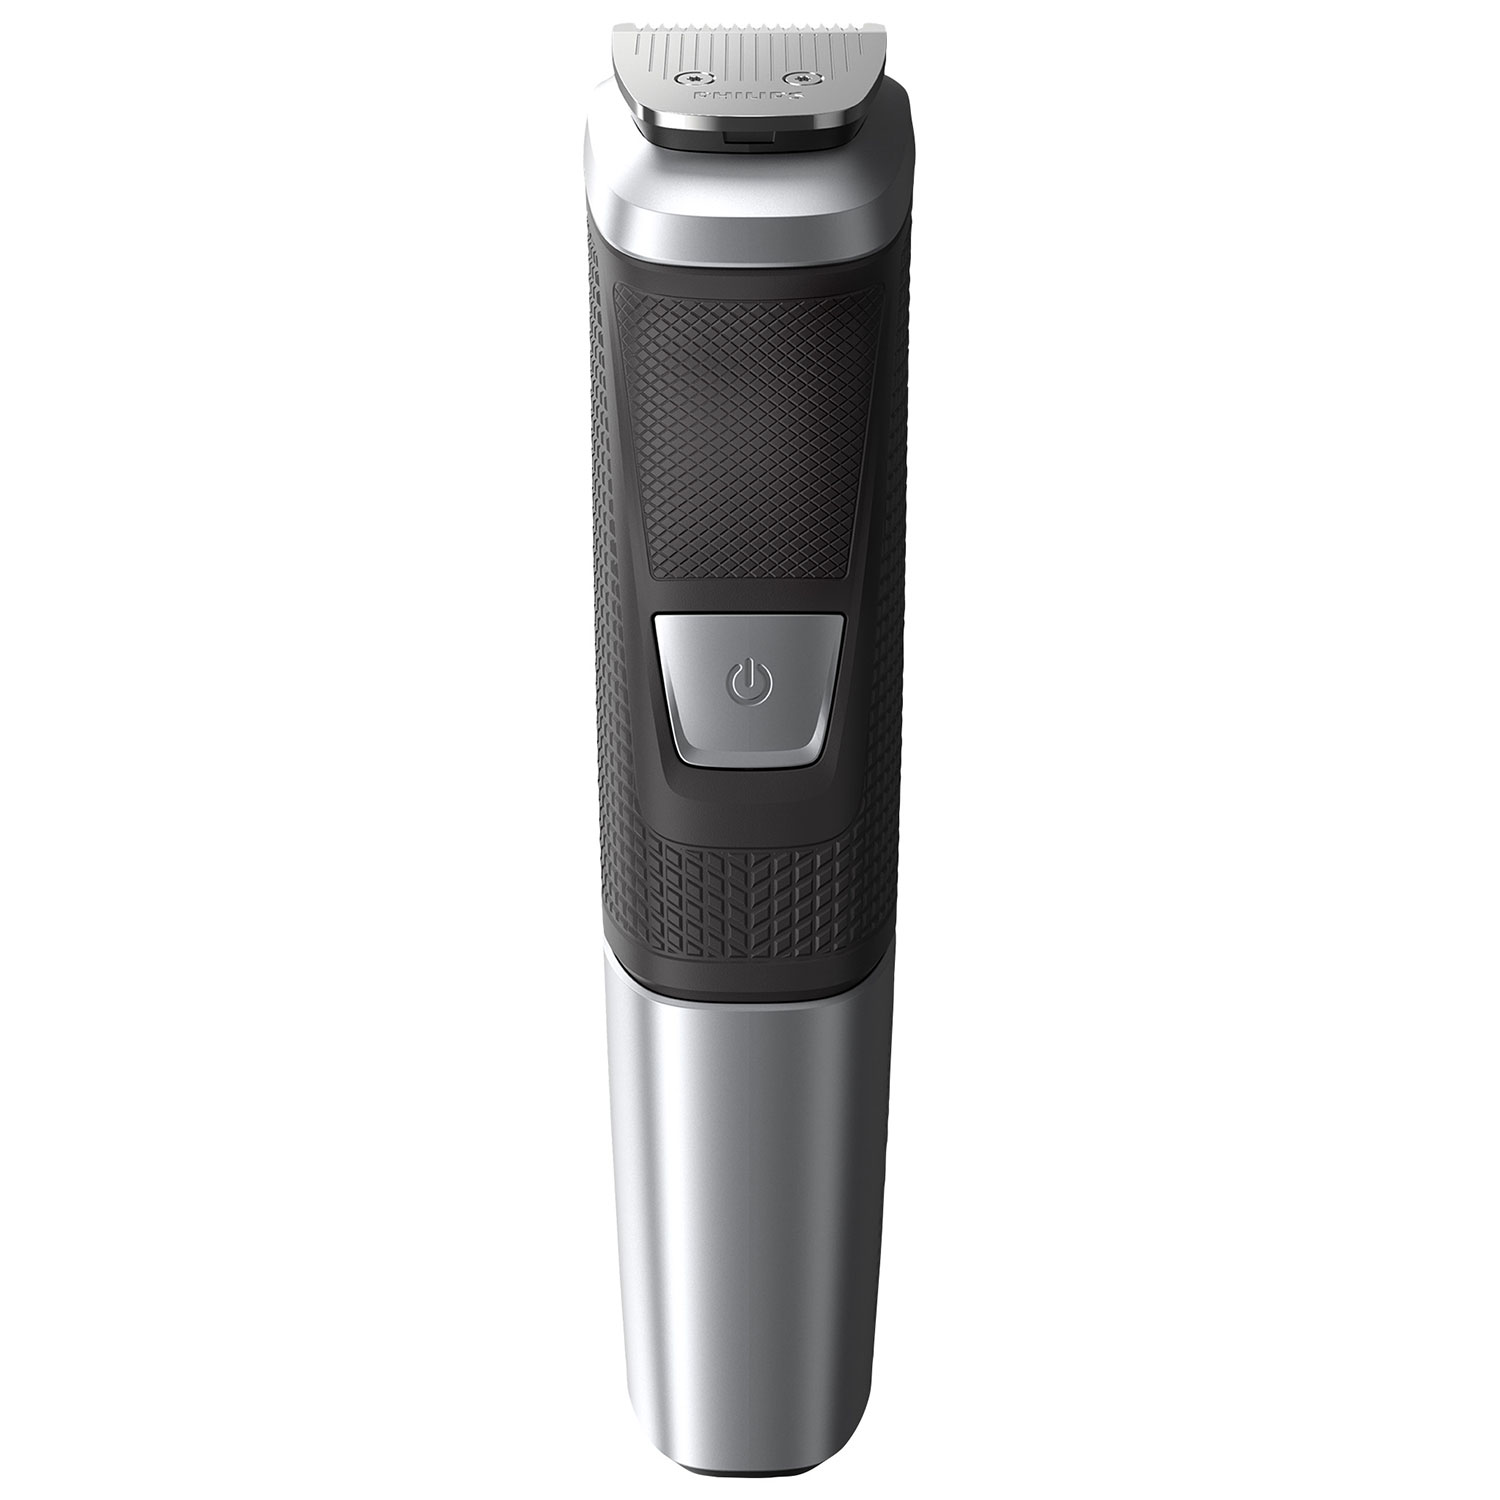 Philips All-in-One Trimmer Multi-Groomer (MG5750/18)